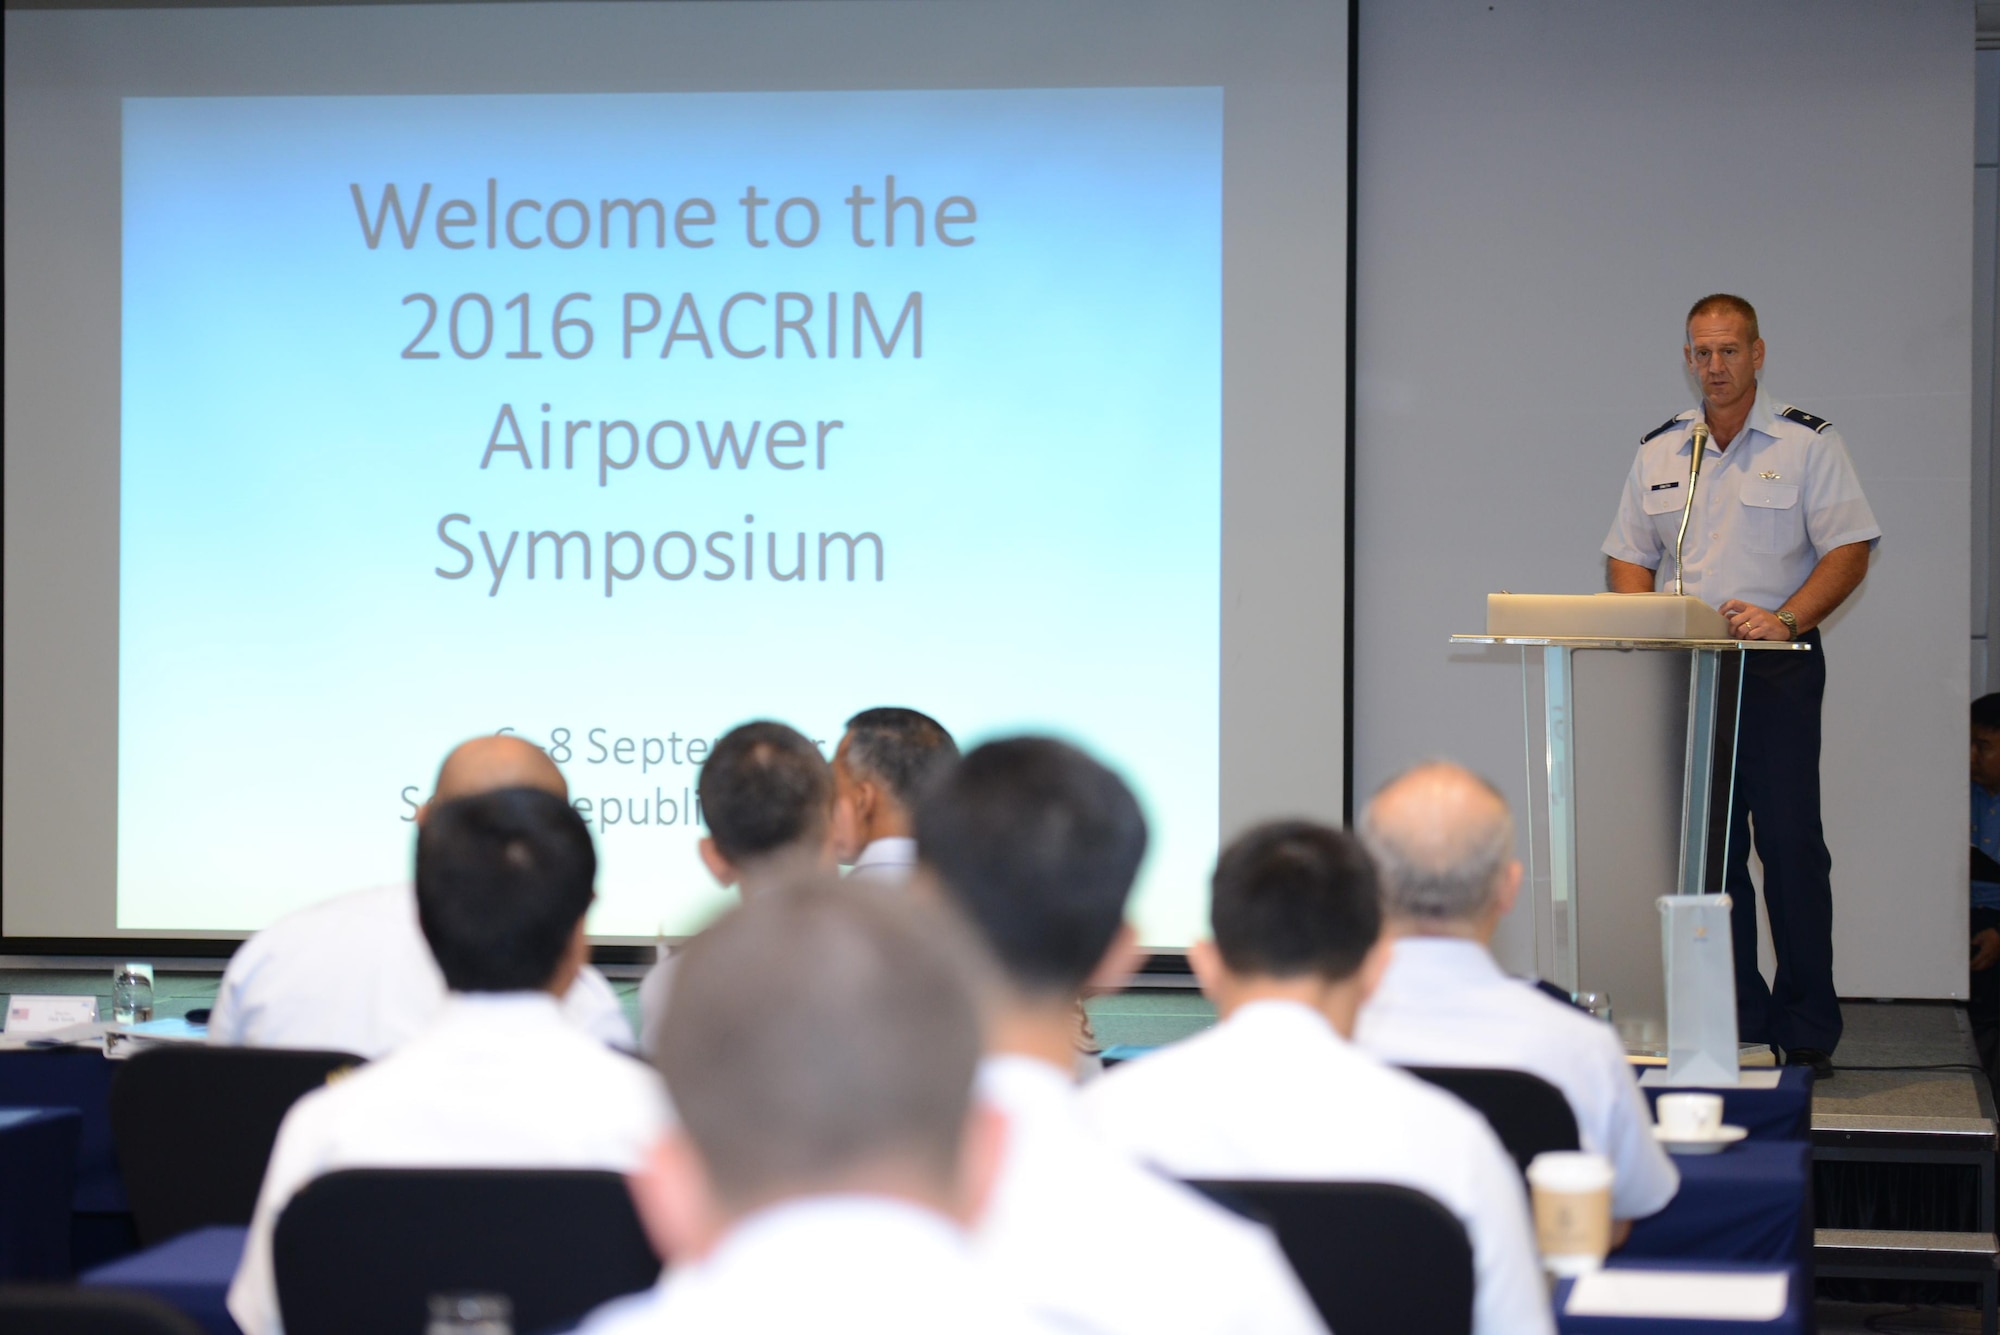 U.S. Air Force Brig. Gen. Dirk Smith, Pacific Air Forces Director of Air and Cyberspace Operations, provides a briefing during the recent Pacific Rim (PACRIM) Airpower Symposium, Sept. 5-9, 2016 in Seoul, Republic of Korea. The PACRIM Airpower Symposium builds and improves multilateral relationships among air forces in the Indo-Asia-Pacific region. Bringing regional partners together in forums such as the PACRIM Airpower Symposium to address issues of mutual concern enhance the ability to respond to crises that threaten the peace and stability of the Indo-Asia-Pacific region. (Courtesy photo)